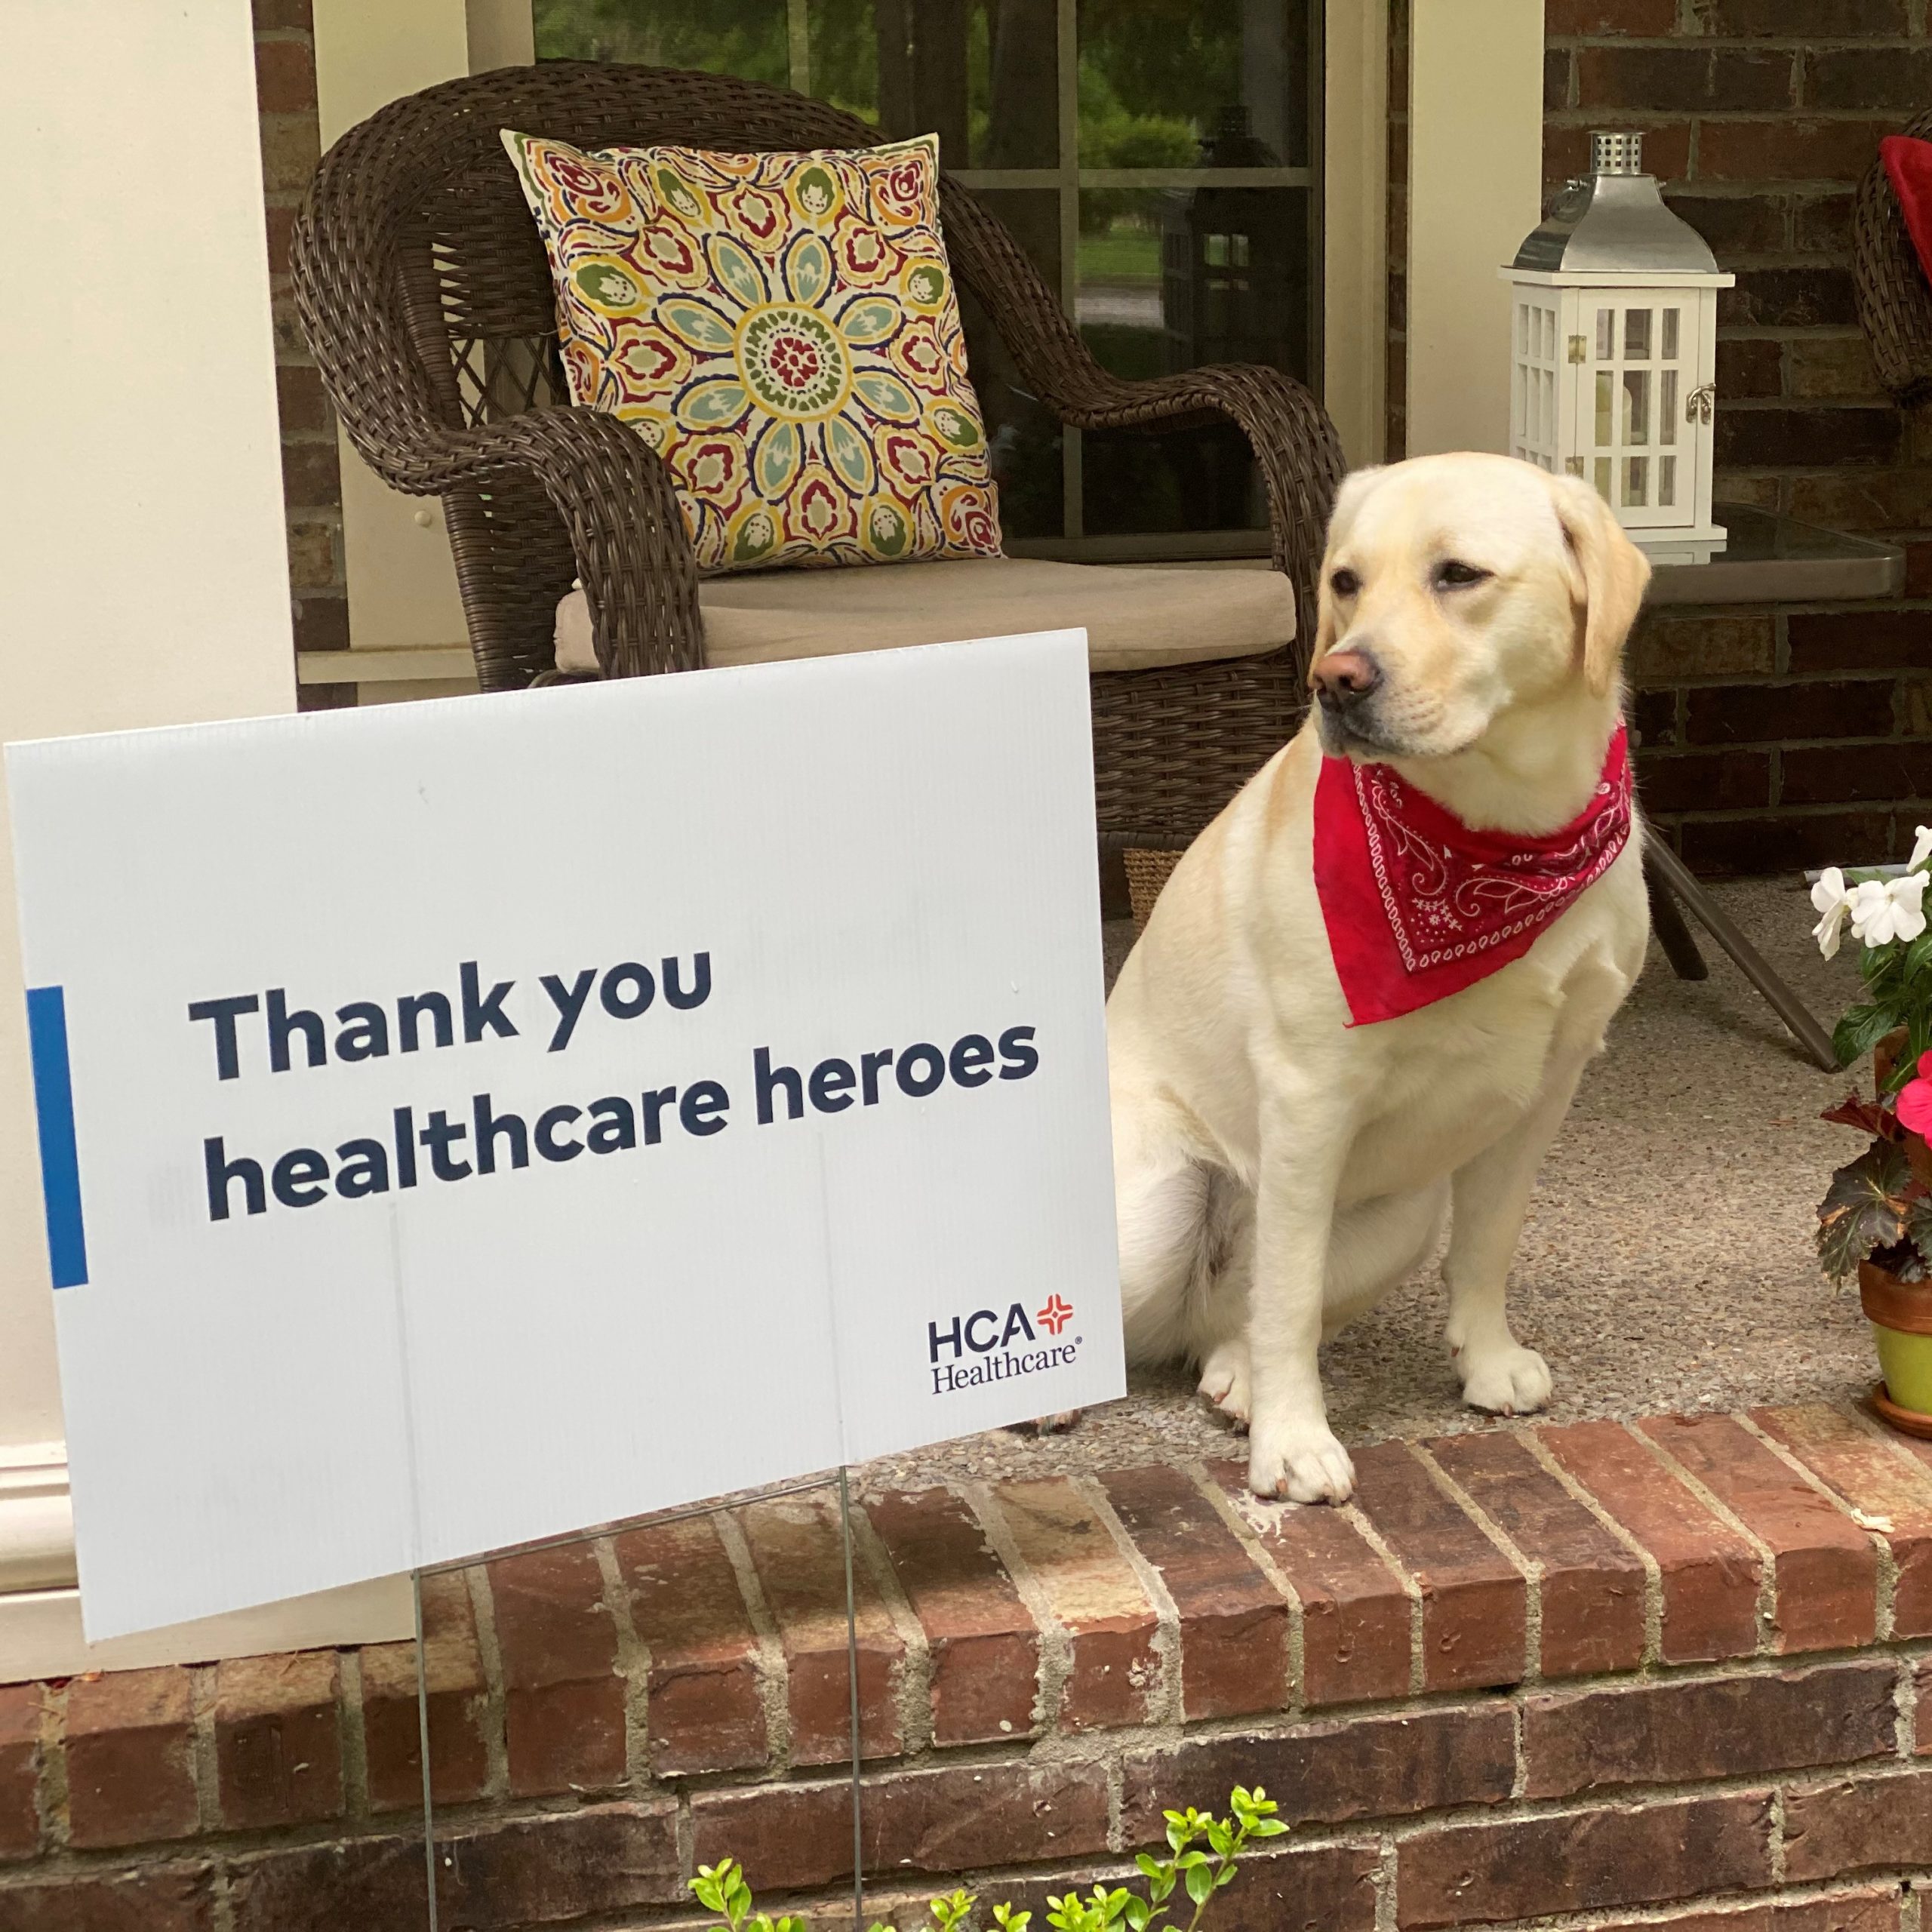 A dog sitting next to a sign that says thank you healthcare heroes